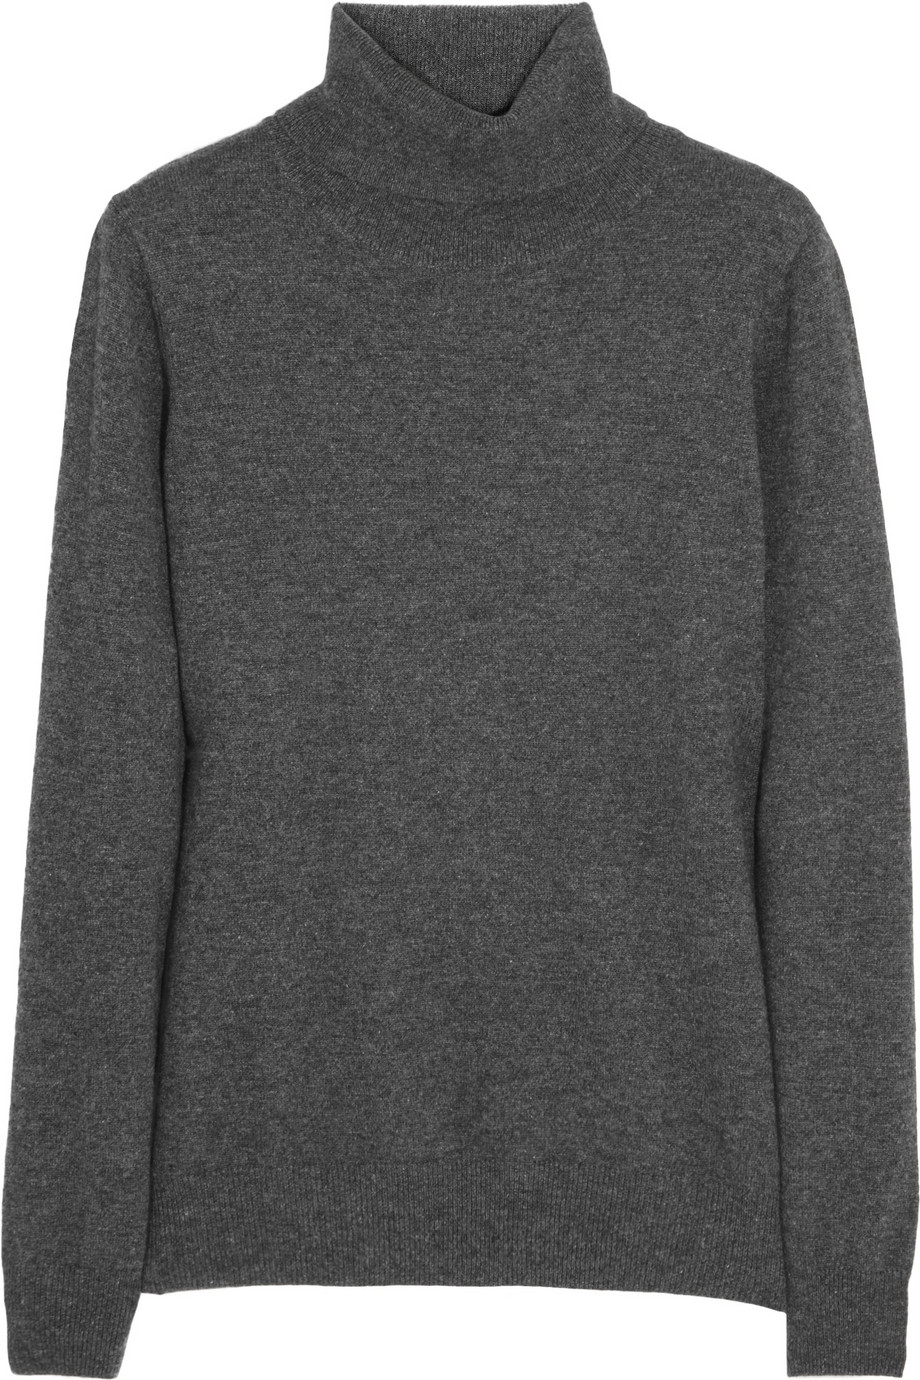 N.peal Cashmere Cashmere Turtleneck Sweater in Gray (Unknown) | Lyst